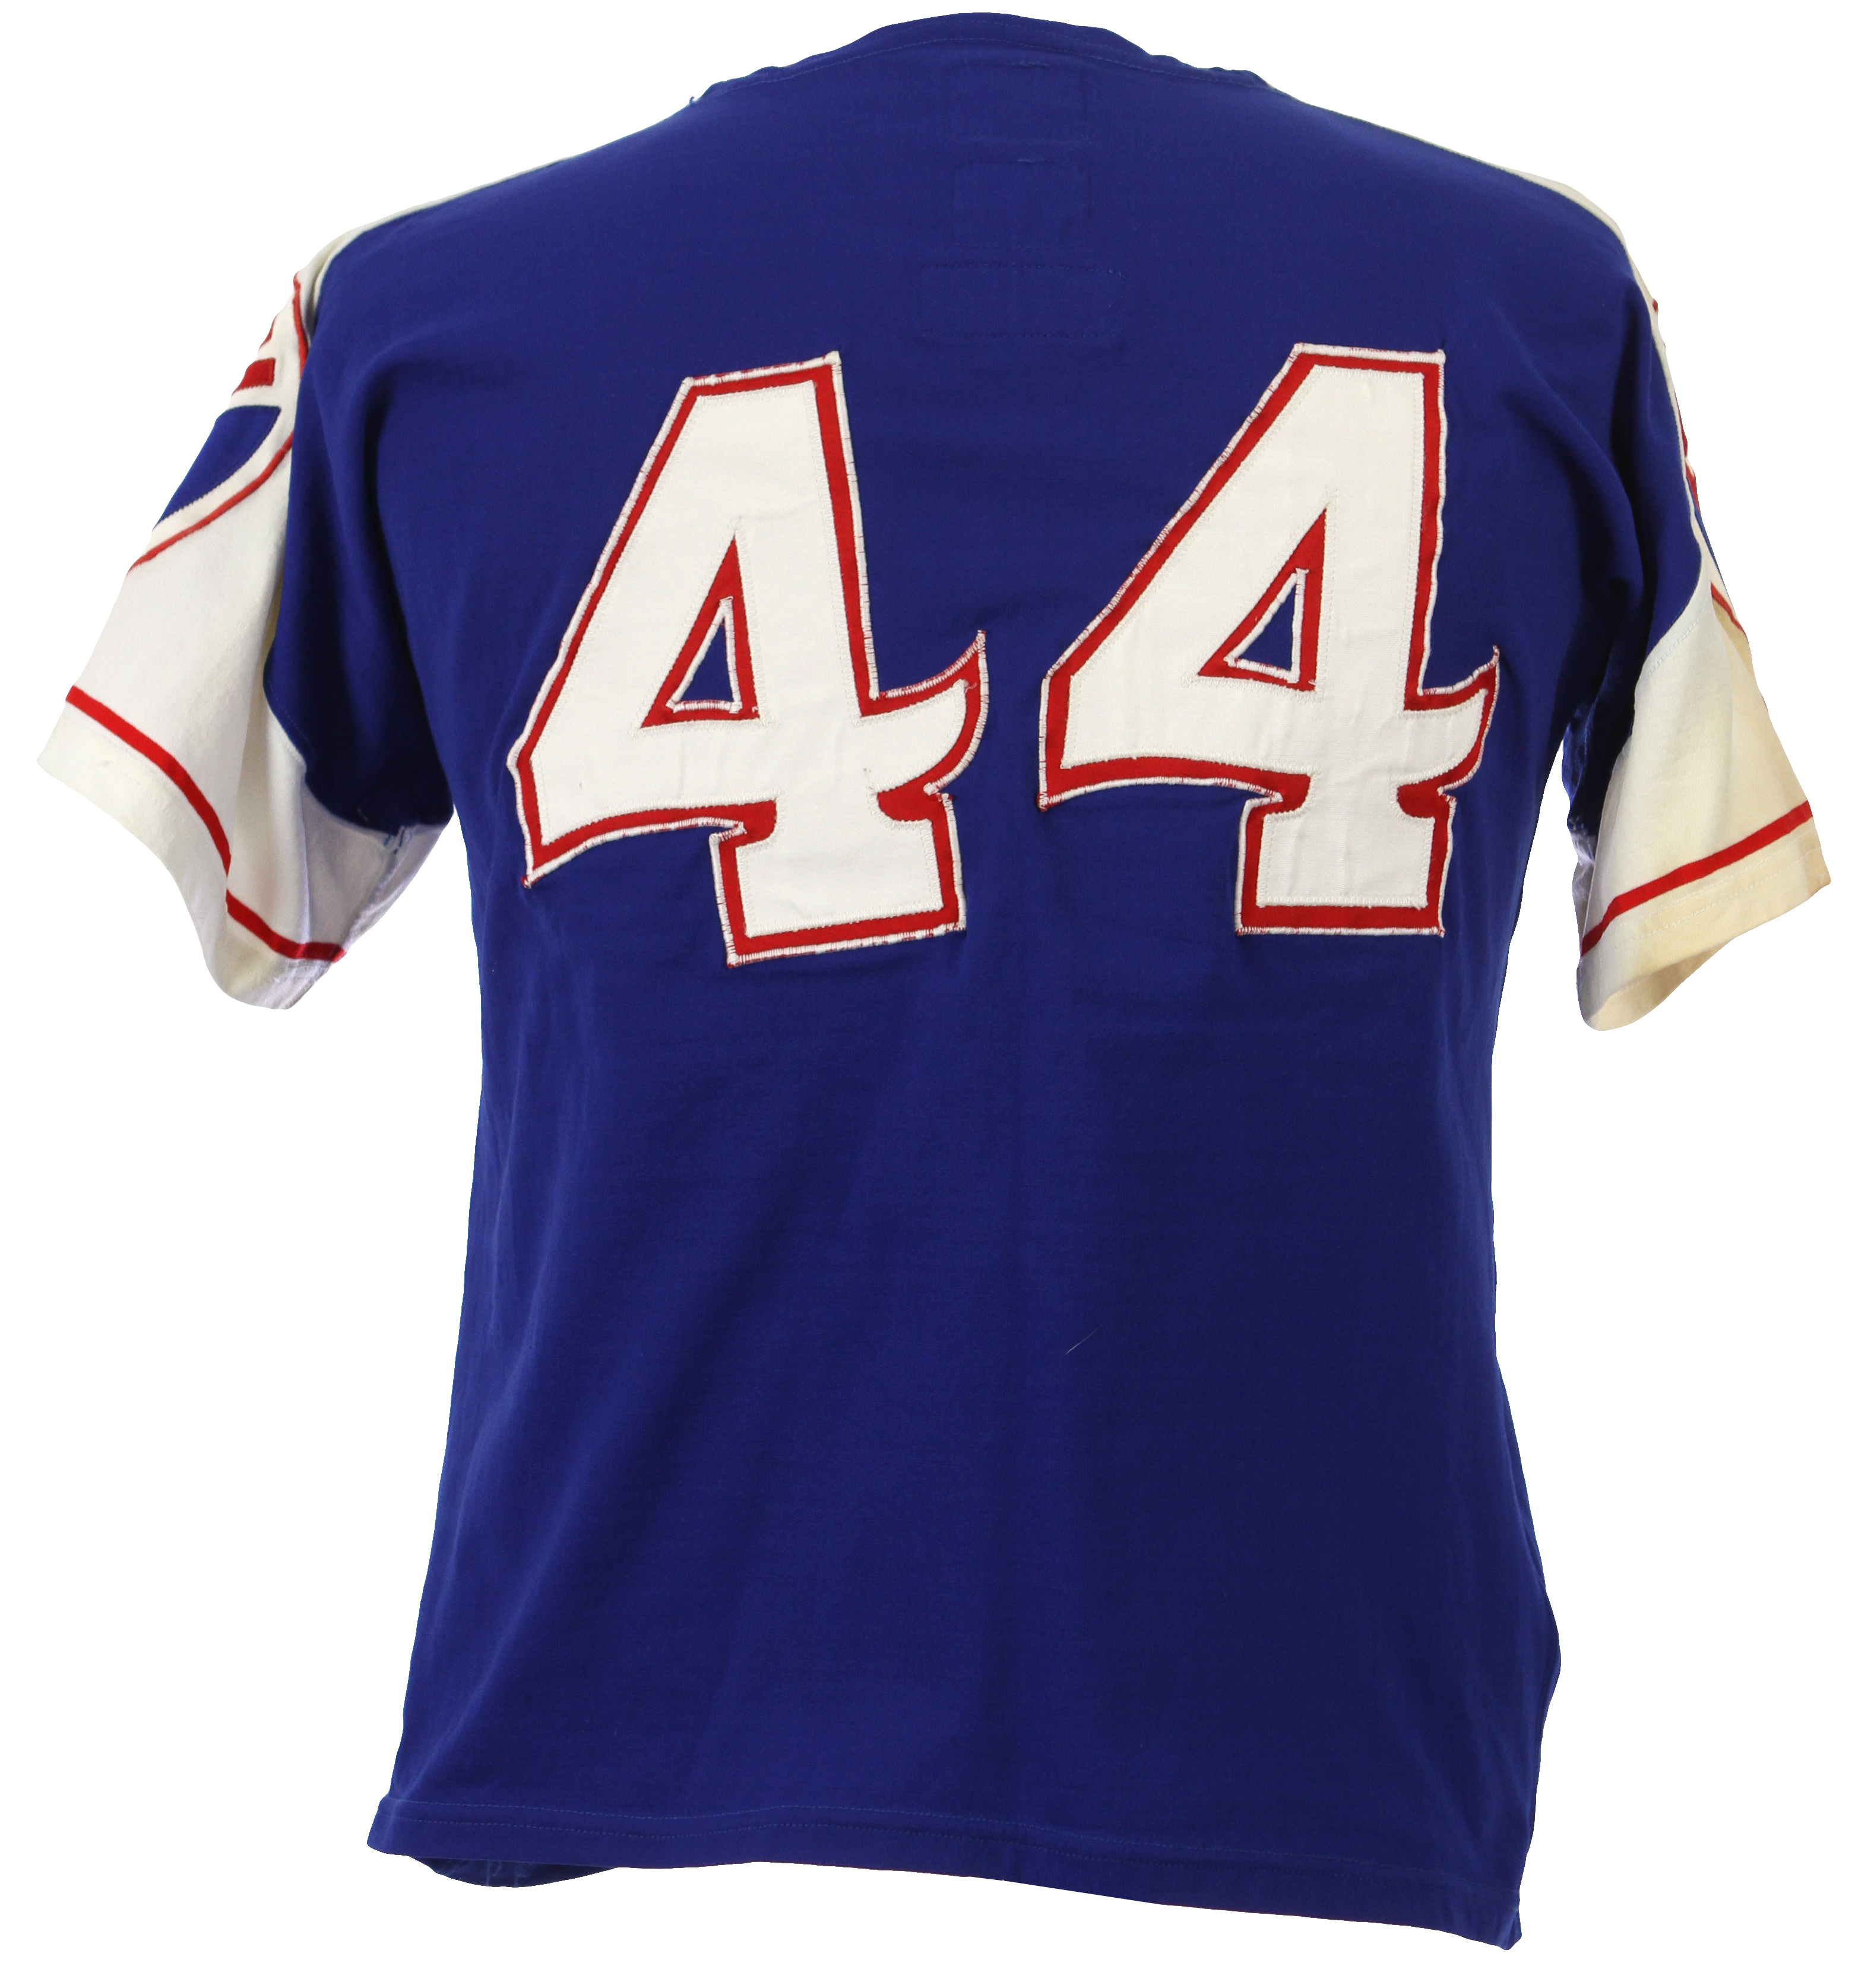 1972 Hank Aaron Game Used & Signed Atlanta Braves Home Jersey